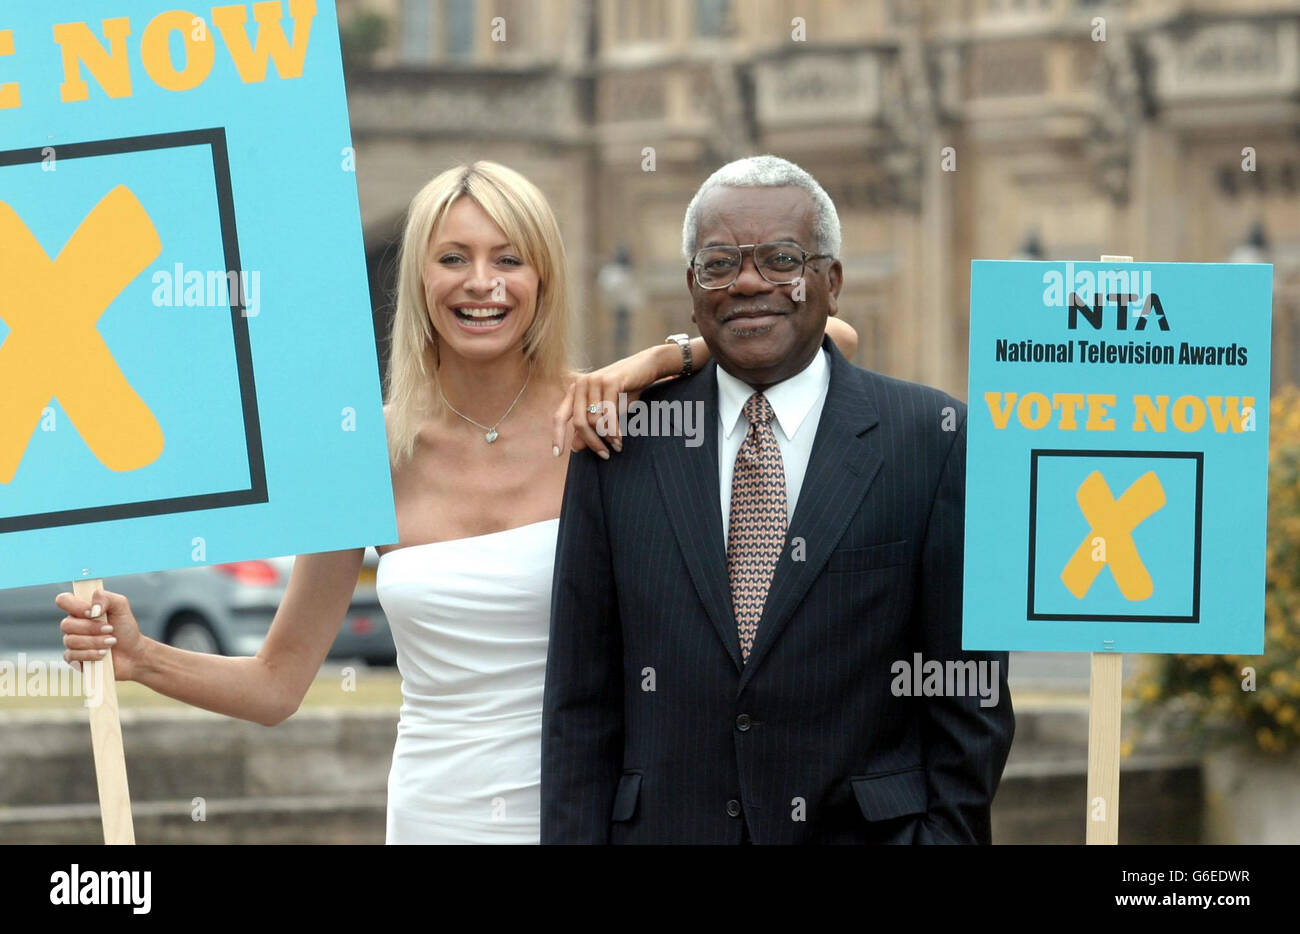 Sir Trevor McDonald and Tess Daly in Abingdon Gardens Westminster, London to mark the commencment of voting for the National Television Awards (NTA). Stock Photo